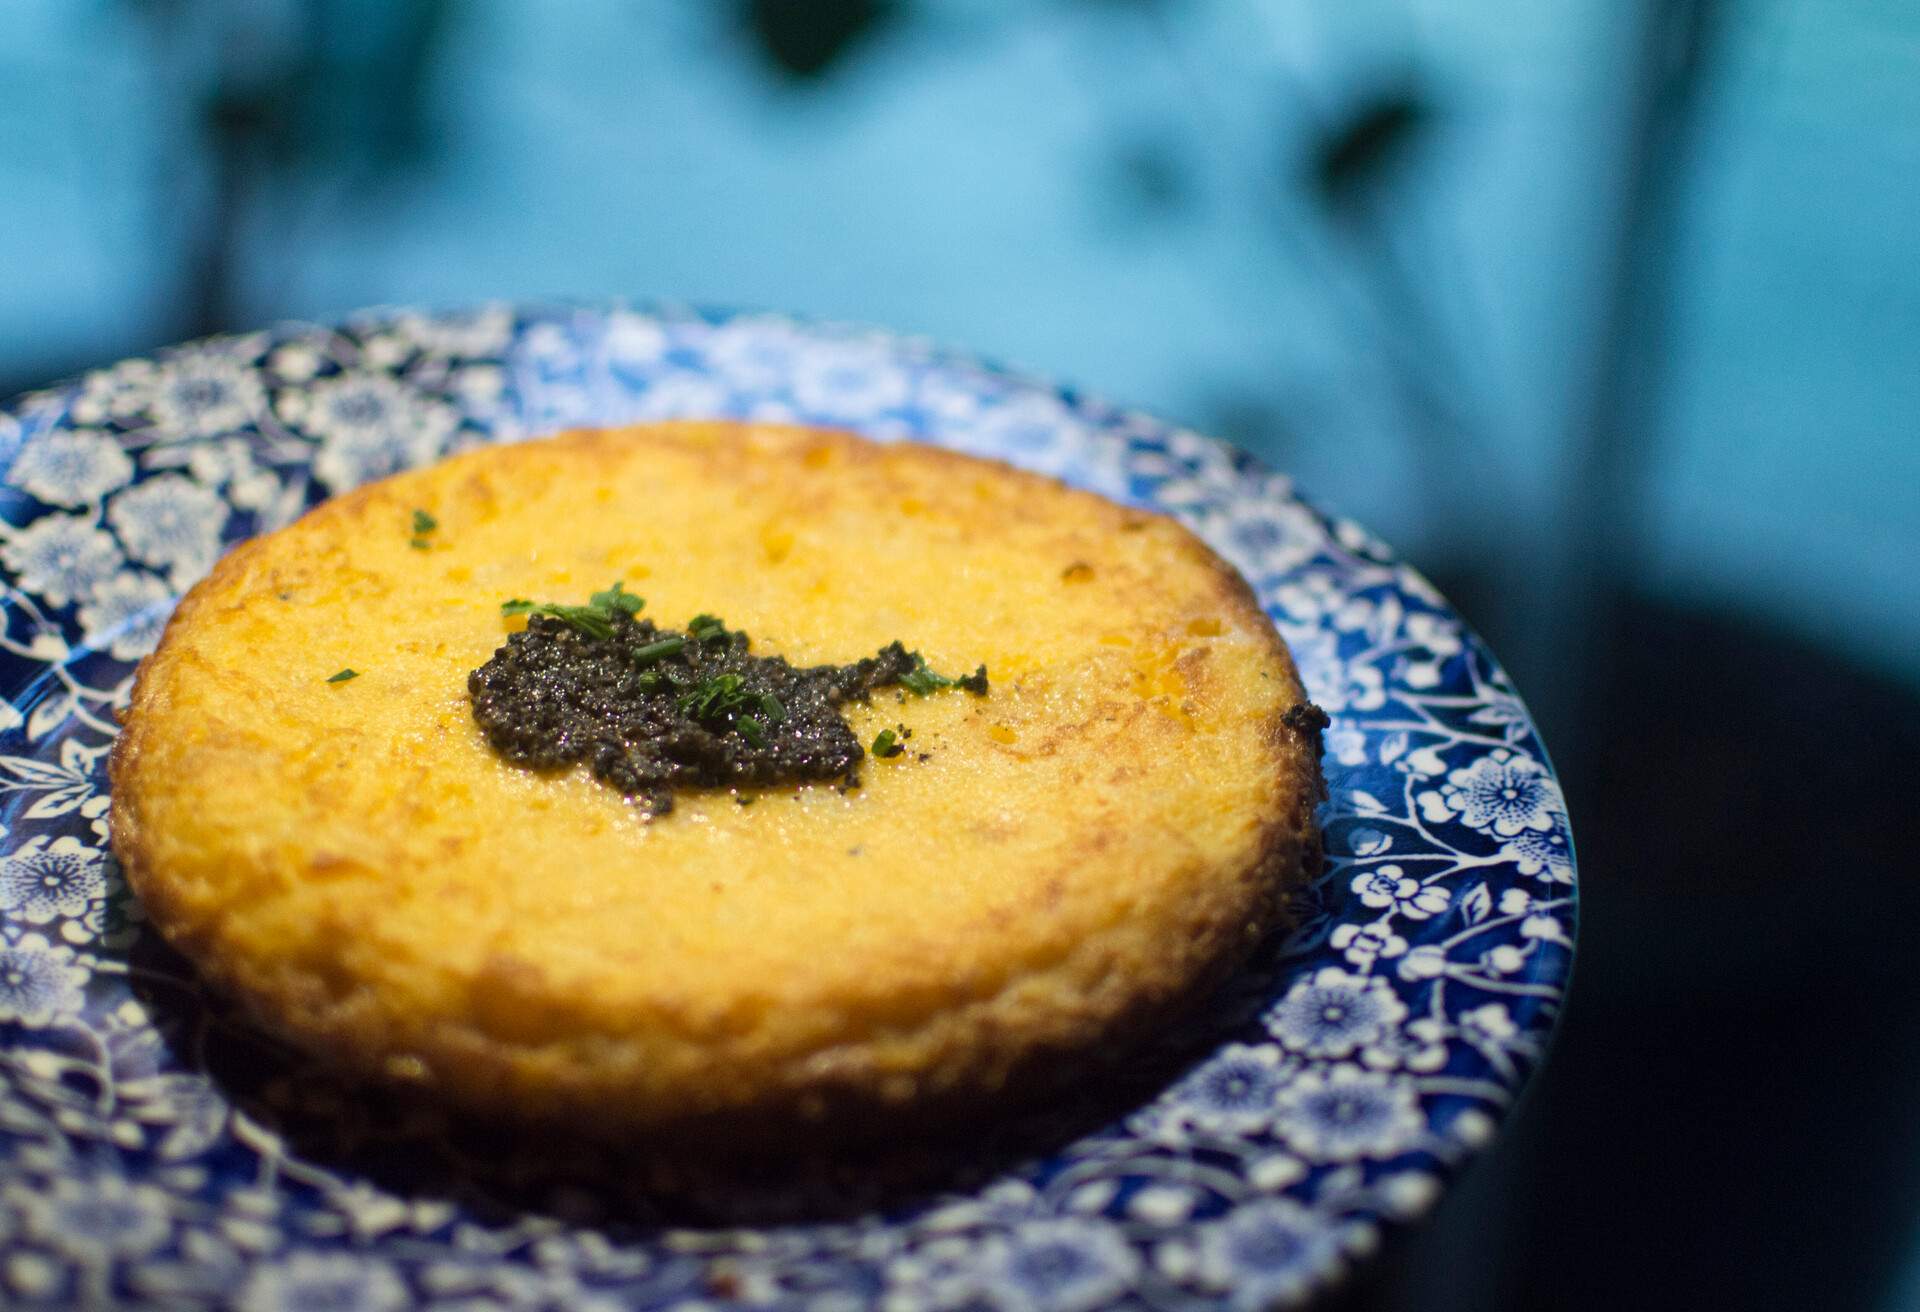 Spanish omelette or Tortilla Espanola, served on a decorative blue floral plate in a restaurant.